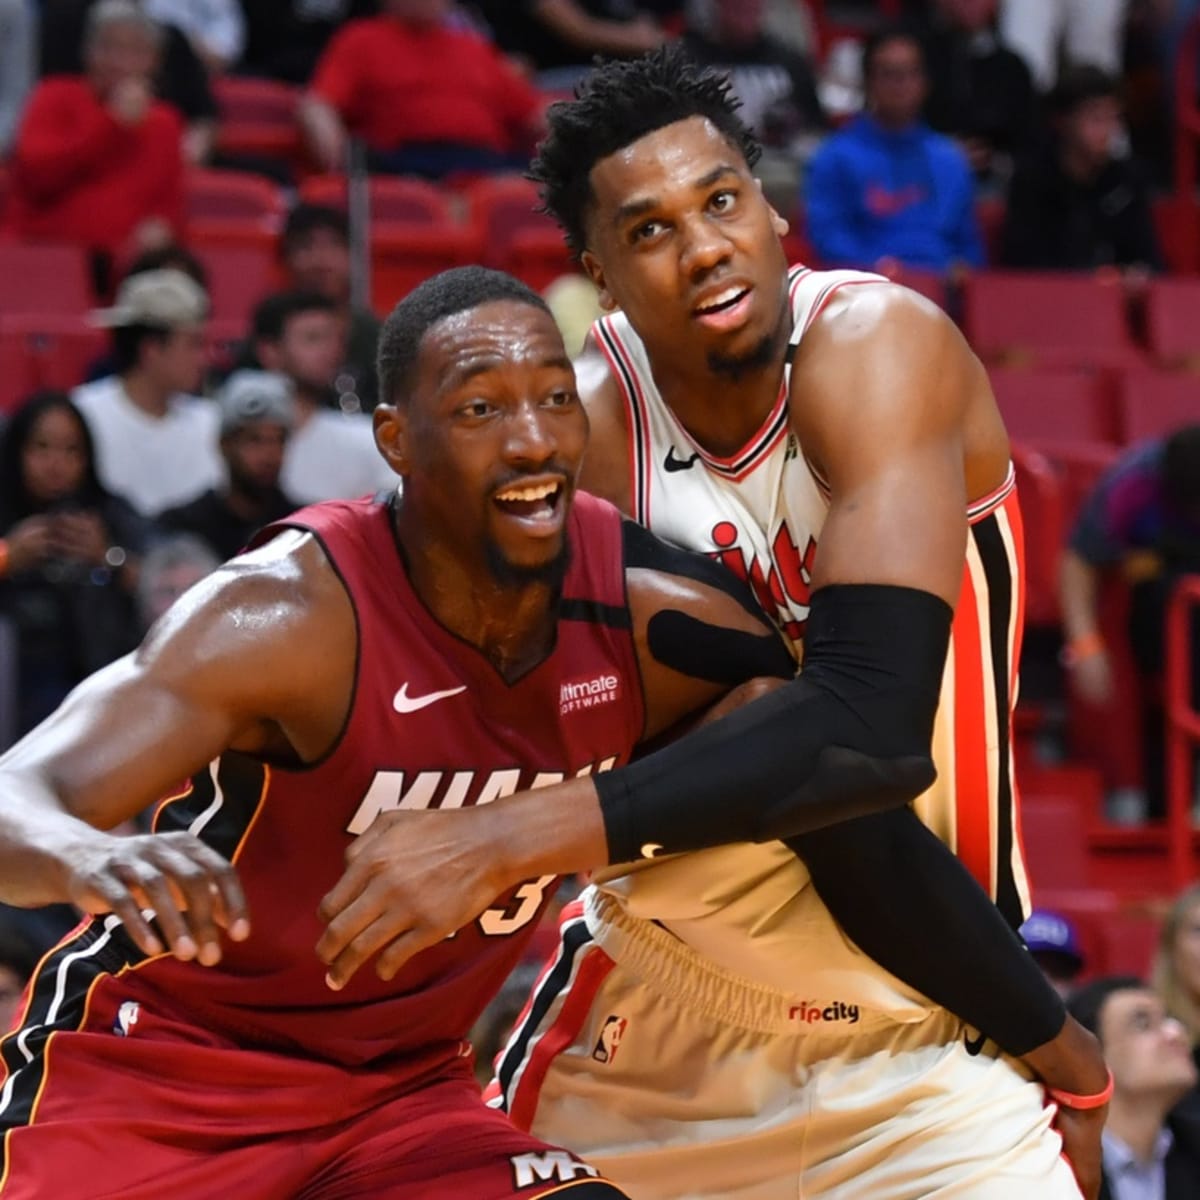 See ups and downs of Hassan Whiteside's Miami Heat career